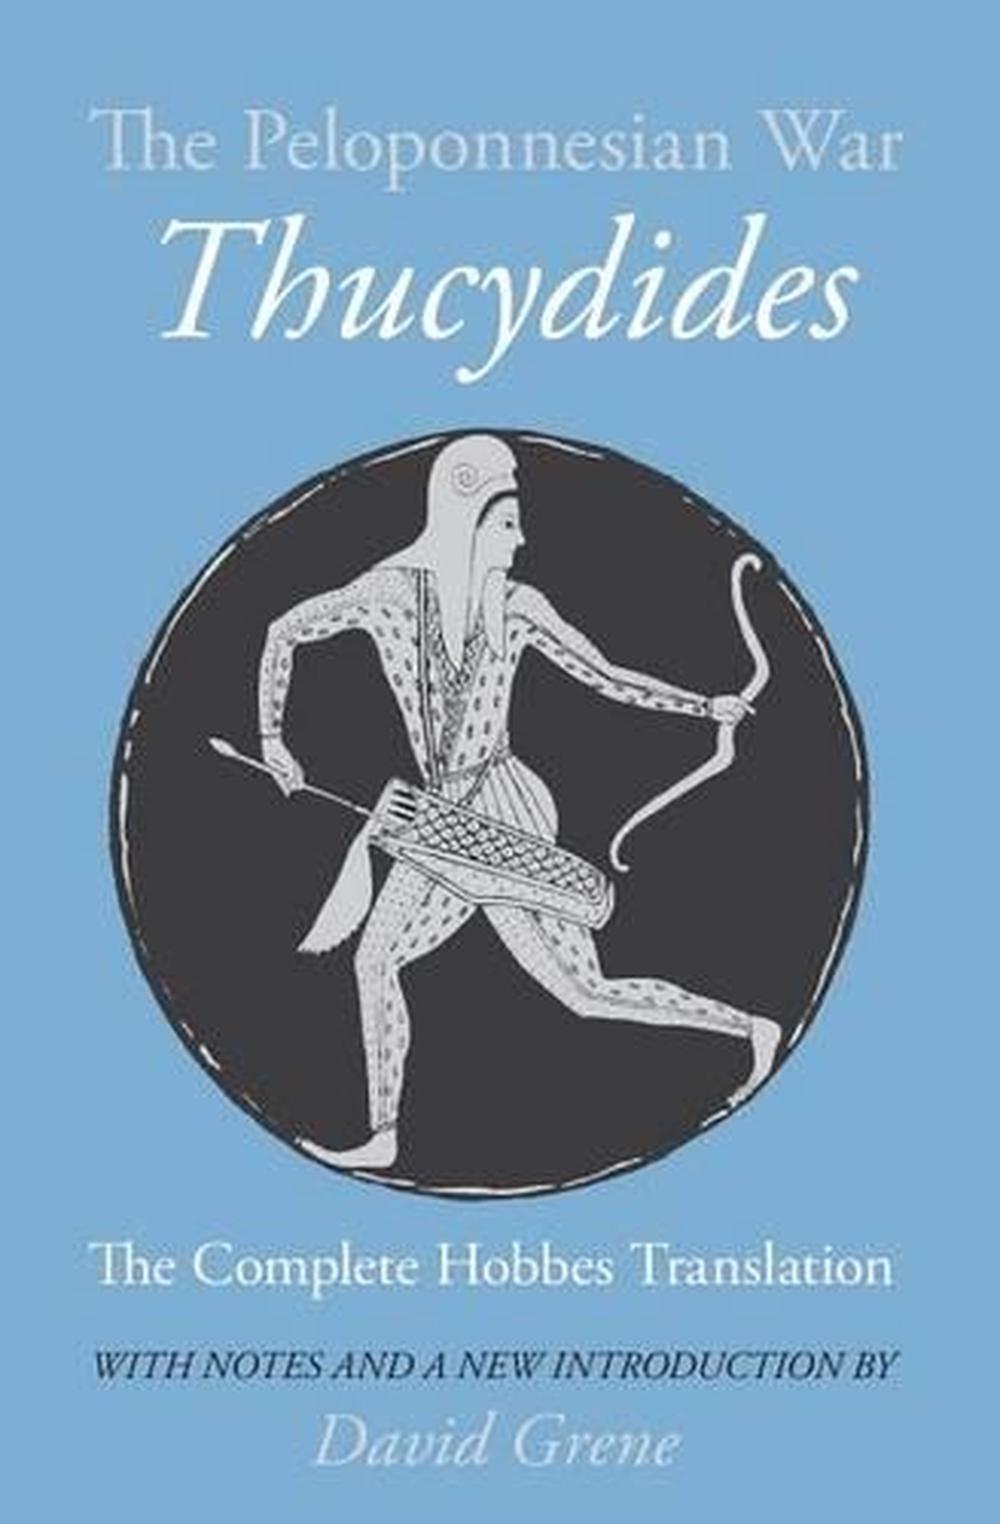 thucydides history of the peloponnesian war book 1